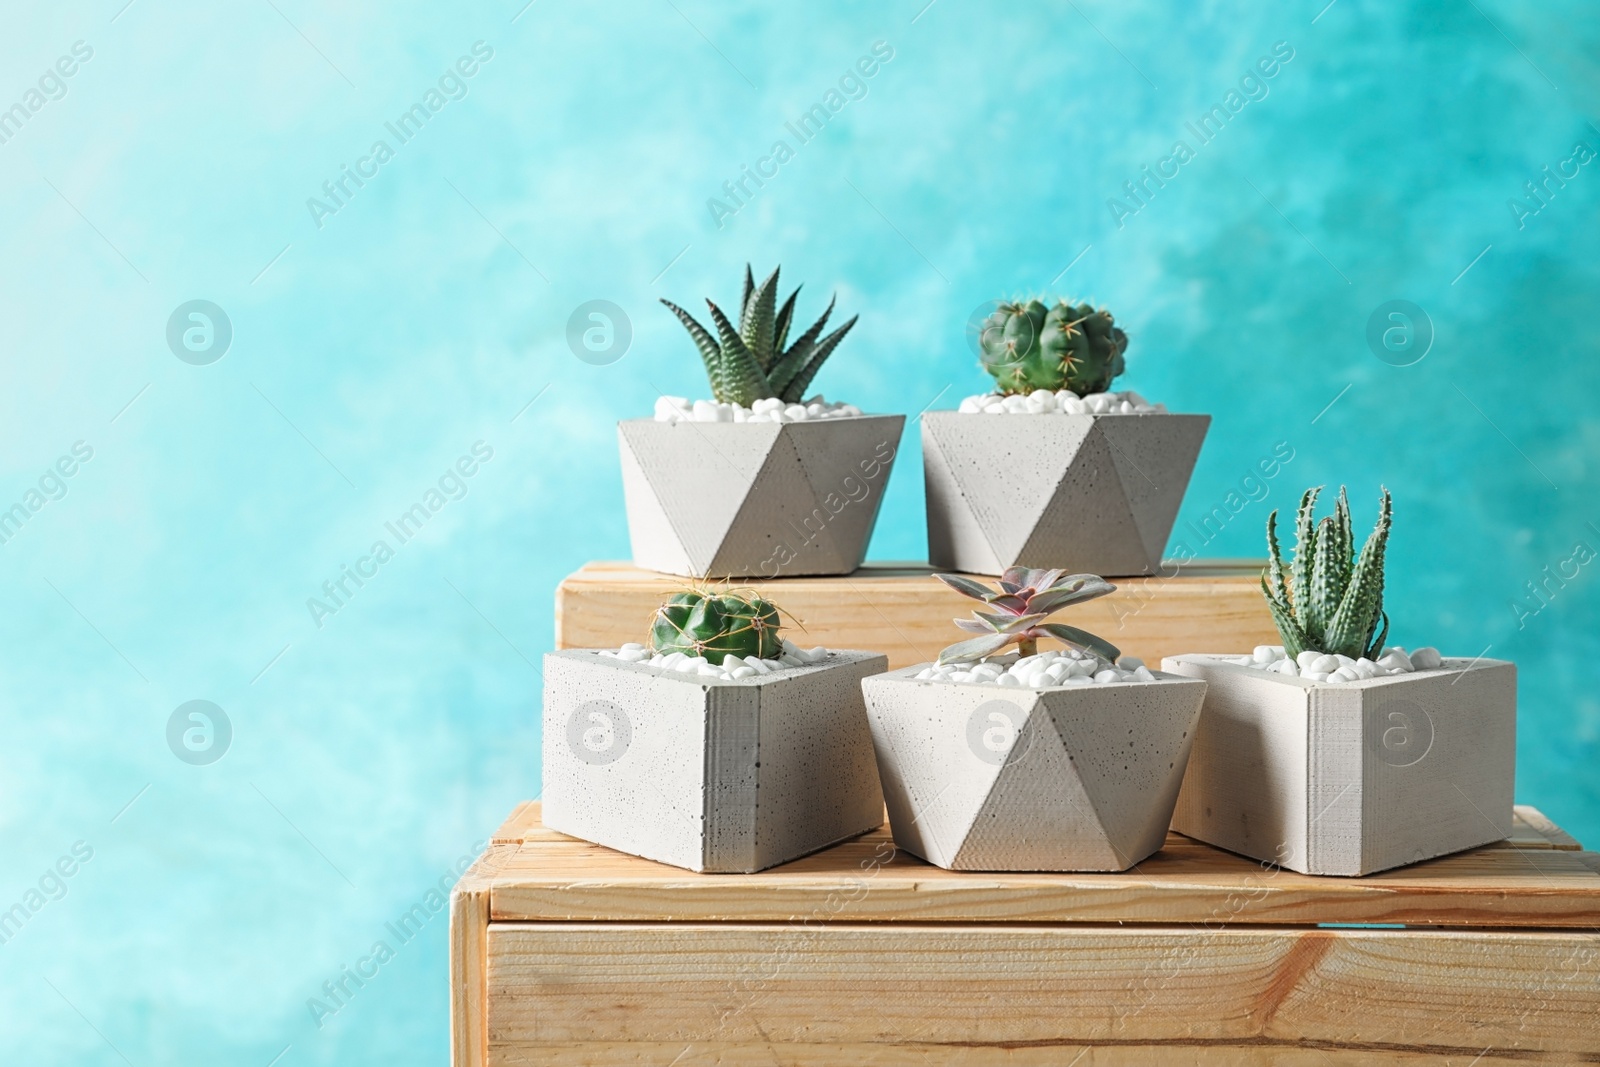 Photo of Beautiful succulent plants in stylish flowerpots on wooden crates against blue background, space for text. Home decor